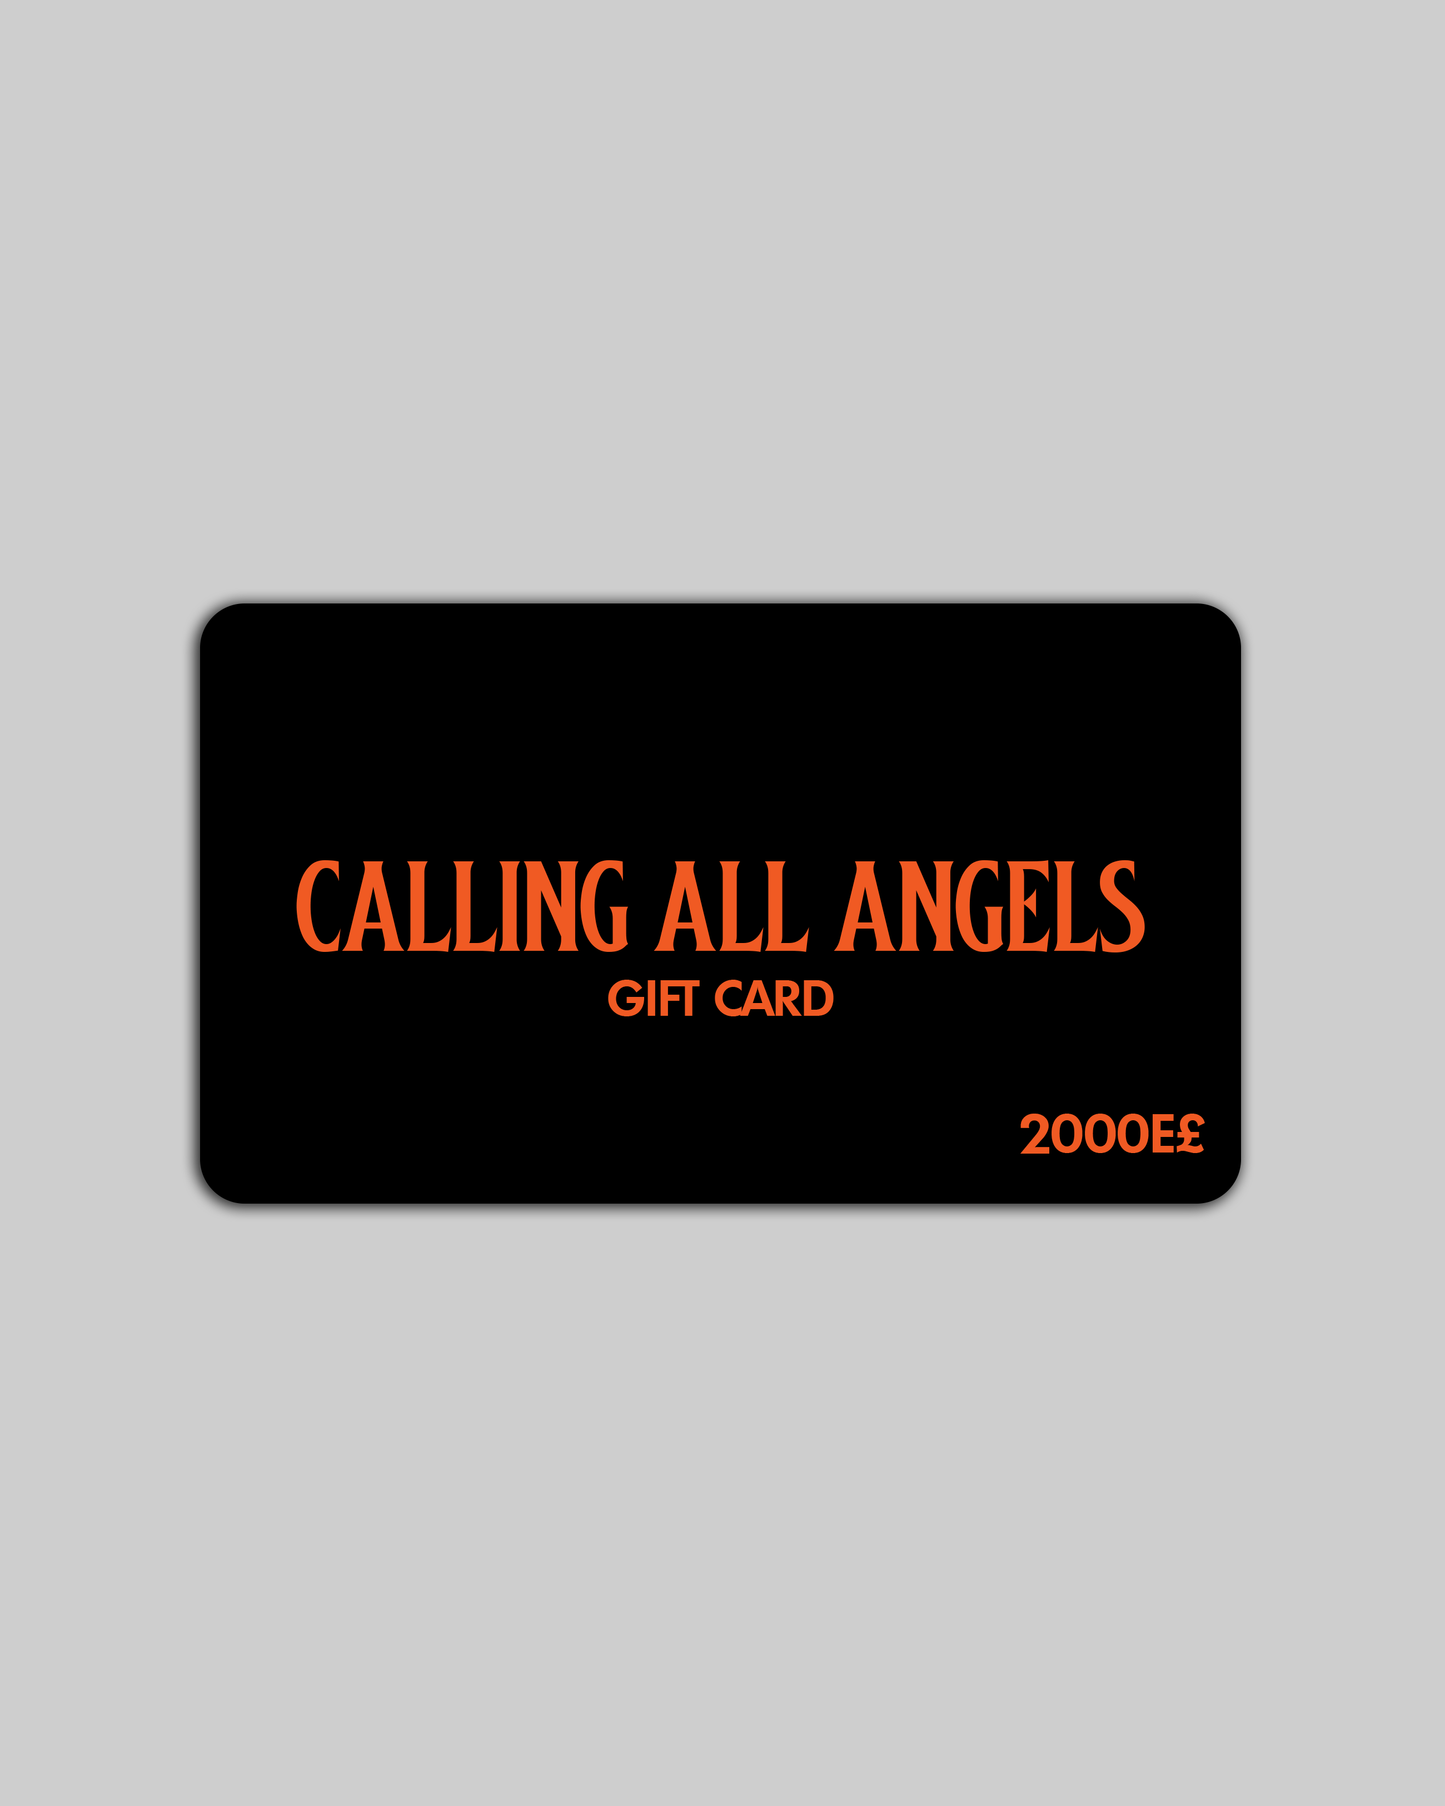 "CALLING ALL ANGELS" GIFT CARD